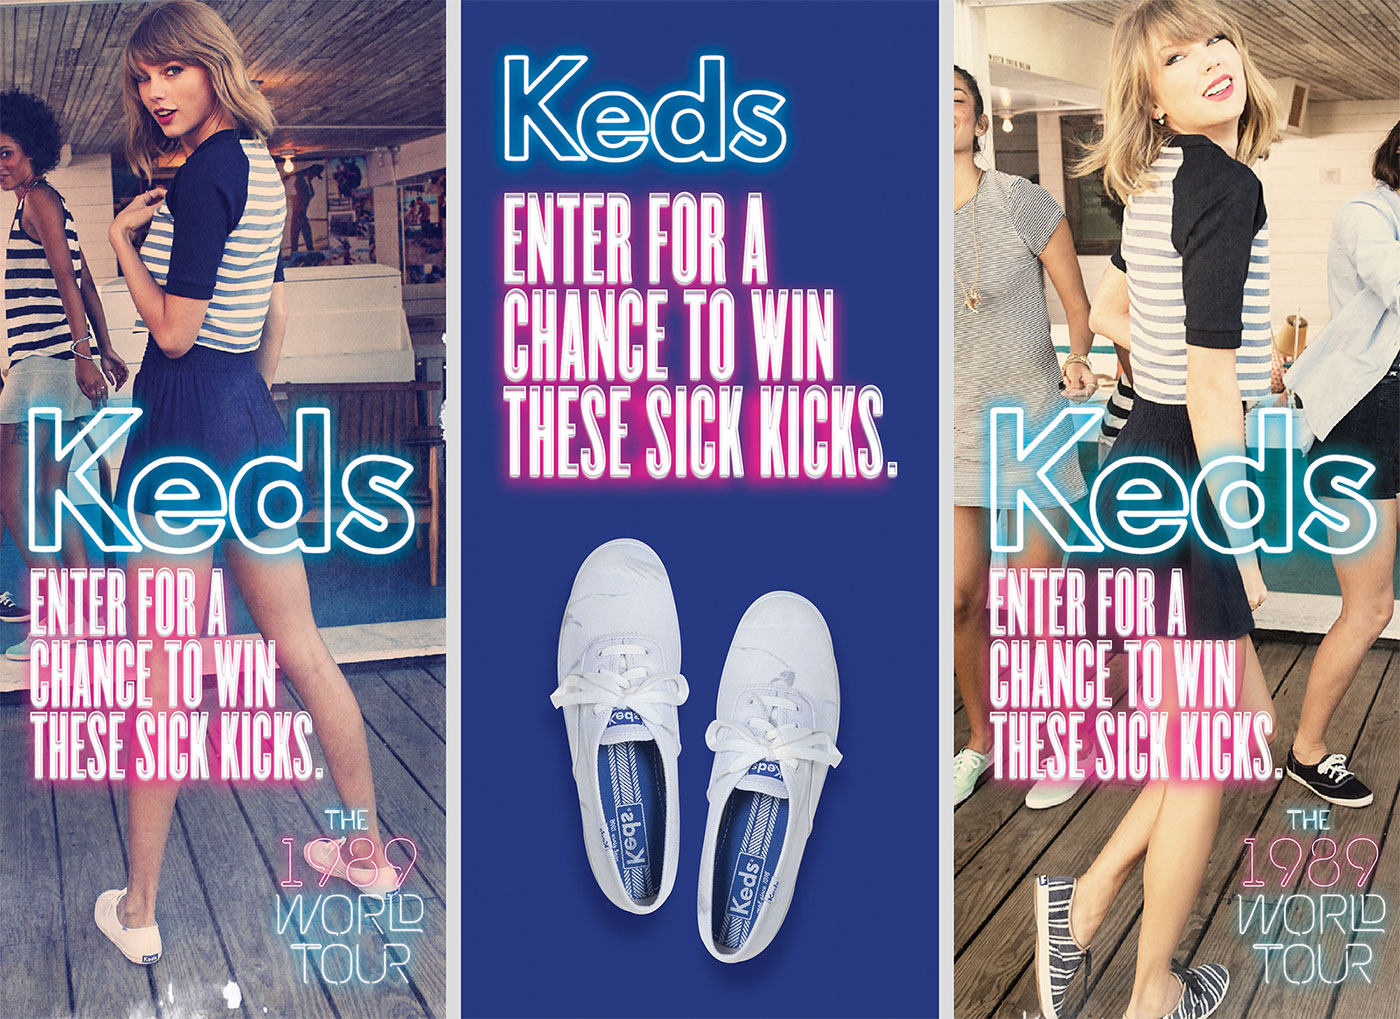 Taylor Swift Believes There Are Only Two Kinds of People in the World:  Those Who Wear Keds With Socks and Those Who Don't